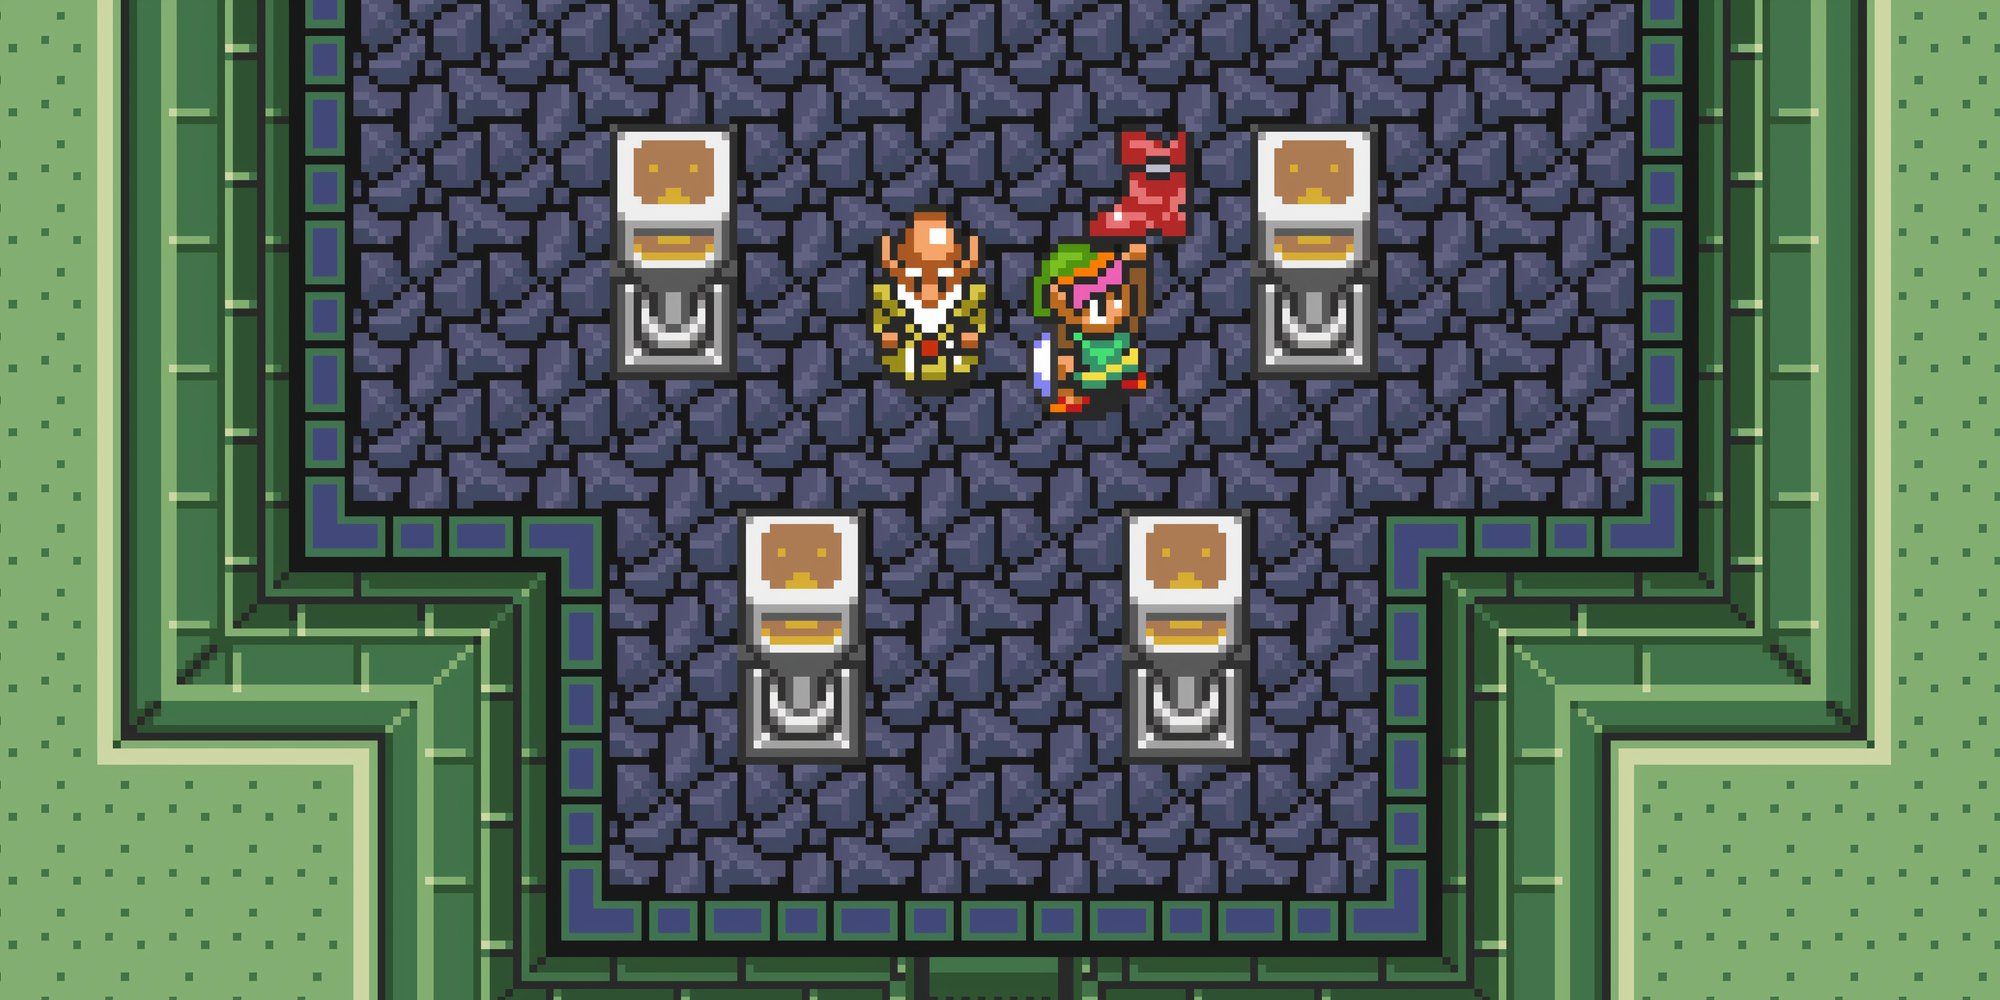 Getting the Pegasus Boots in The Legend of Zelda A Link to the Past